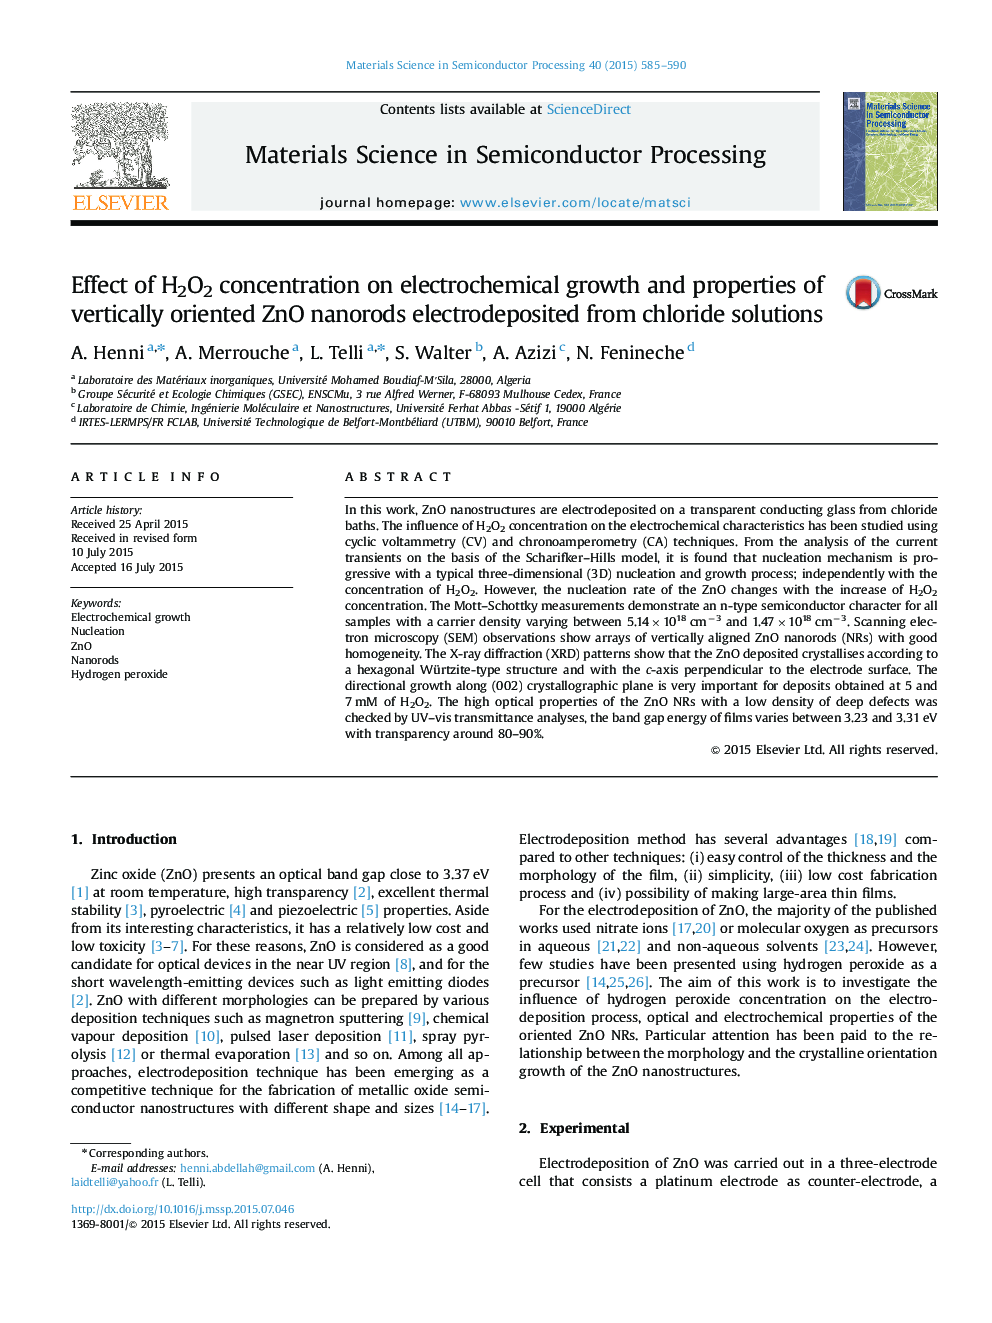 Effect of H2O2 concentration on electrochemical growth and properties of vertically oriented ZnO nanorods electrodeposited from chloride solutions